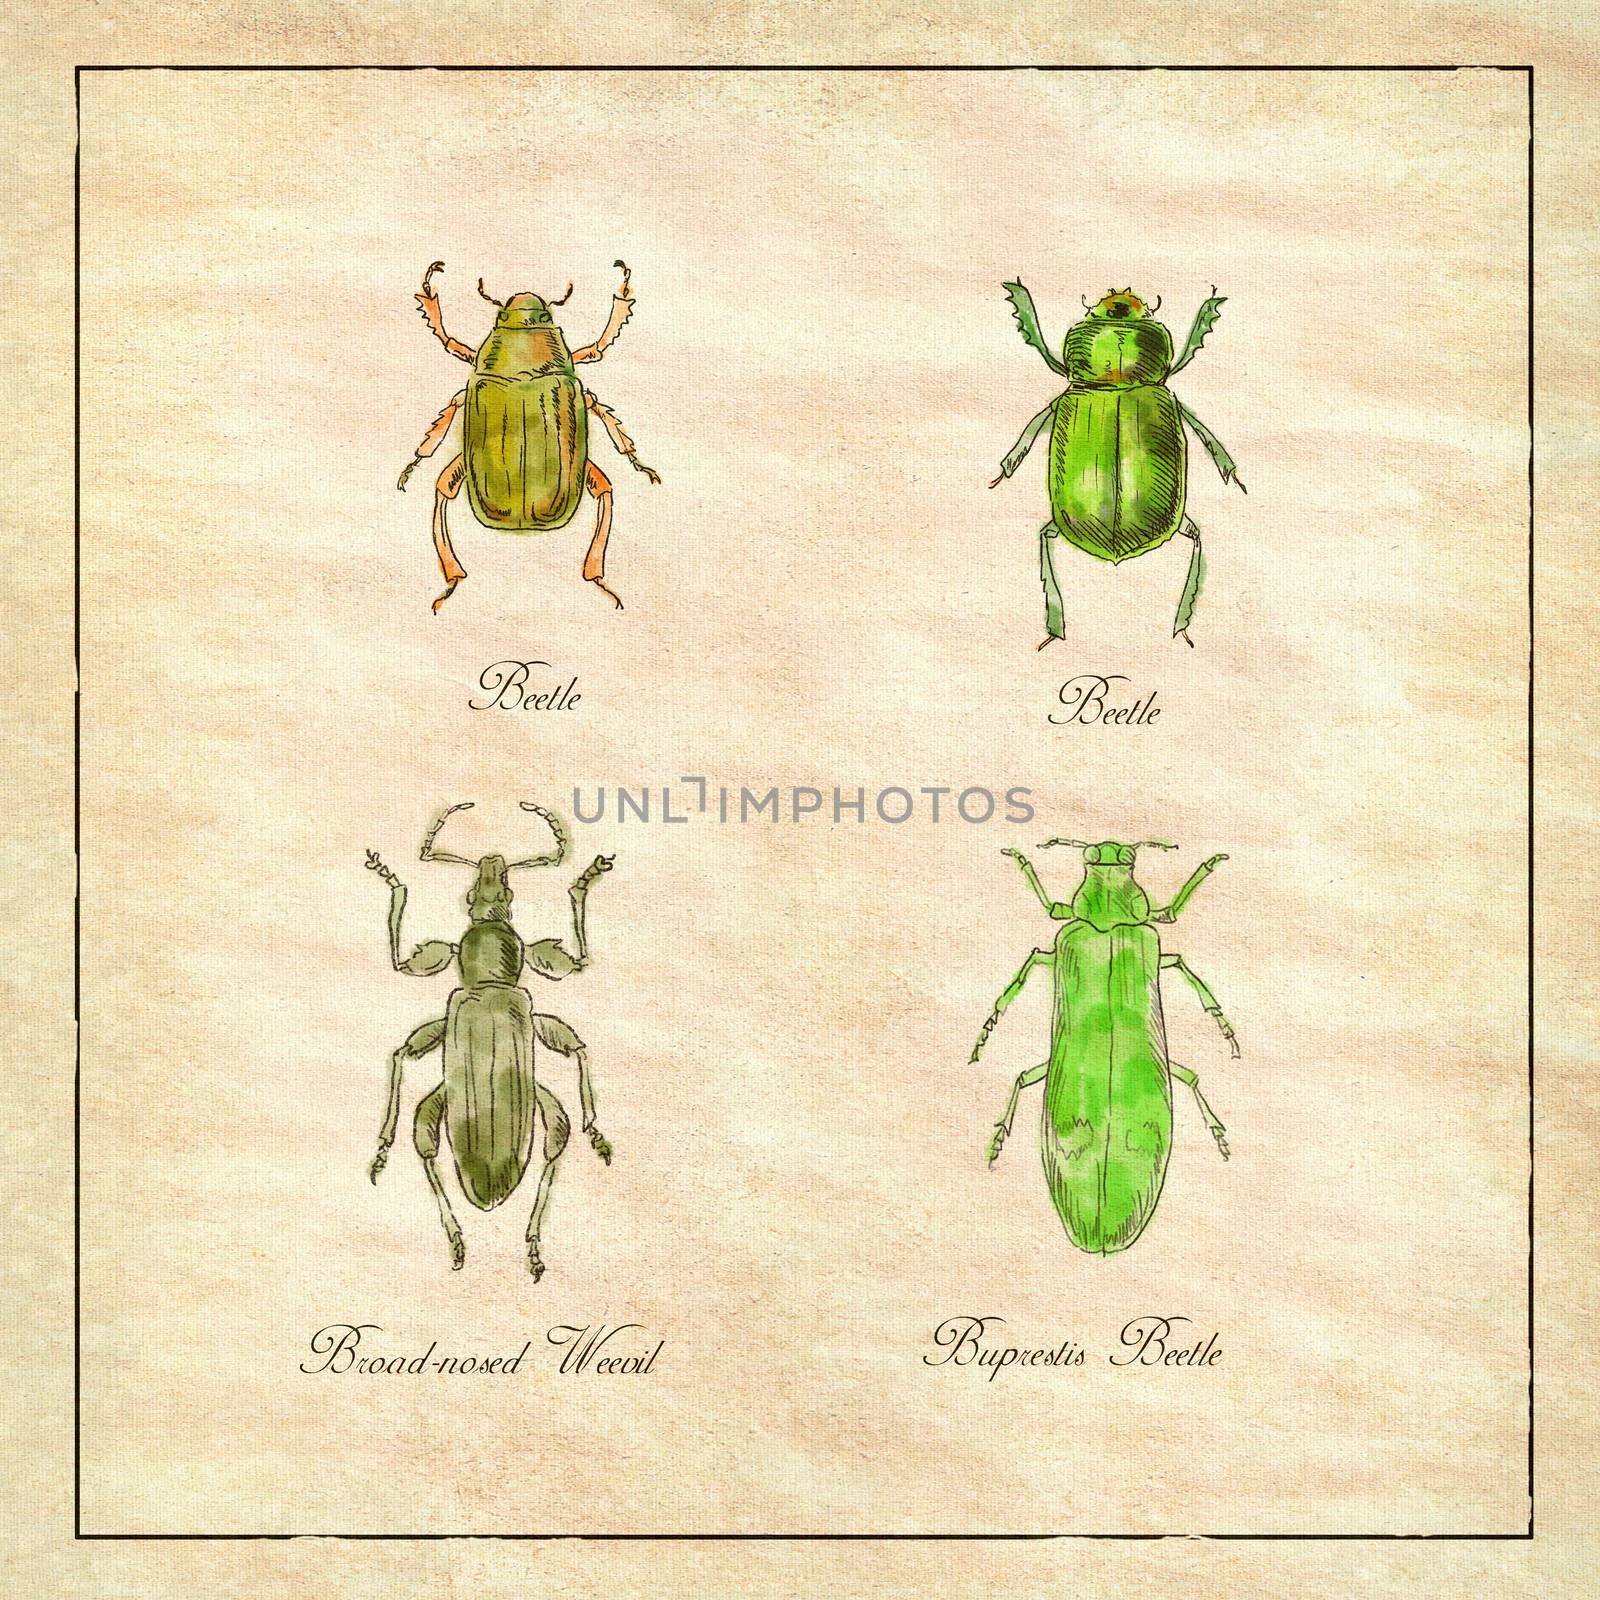 Vintage Victorian drawing illustration of a collection of insects like the Beetle, Broad-Nosed Weevil and Buprestis Beetle on antique paper.